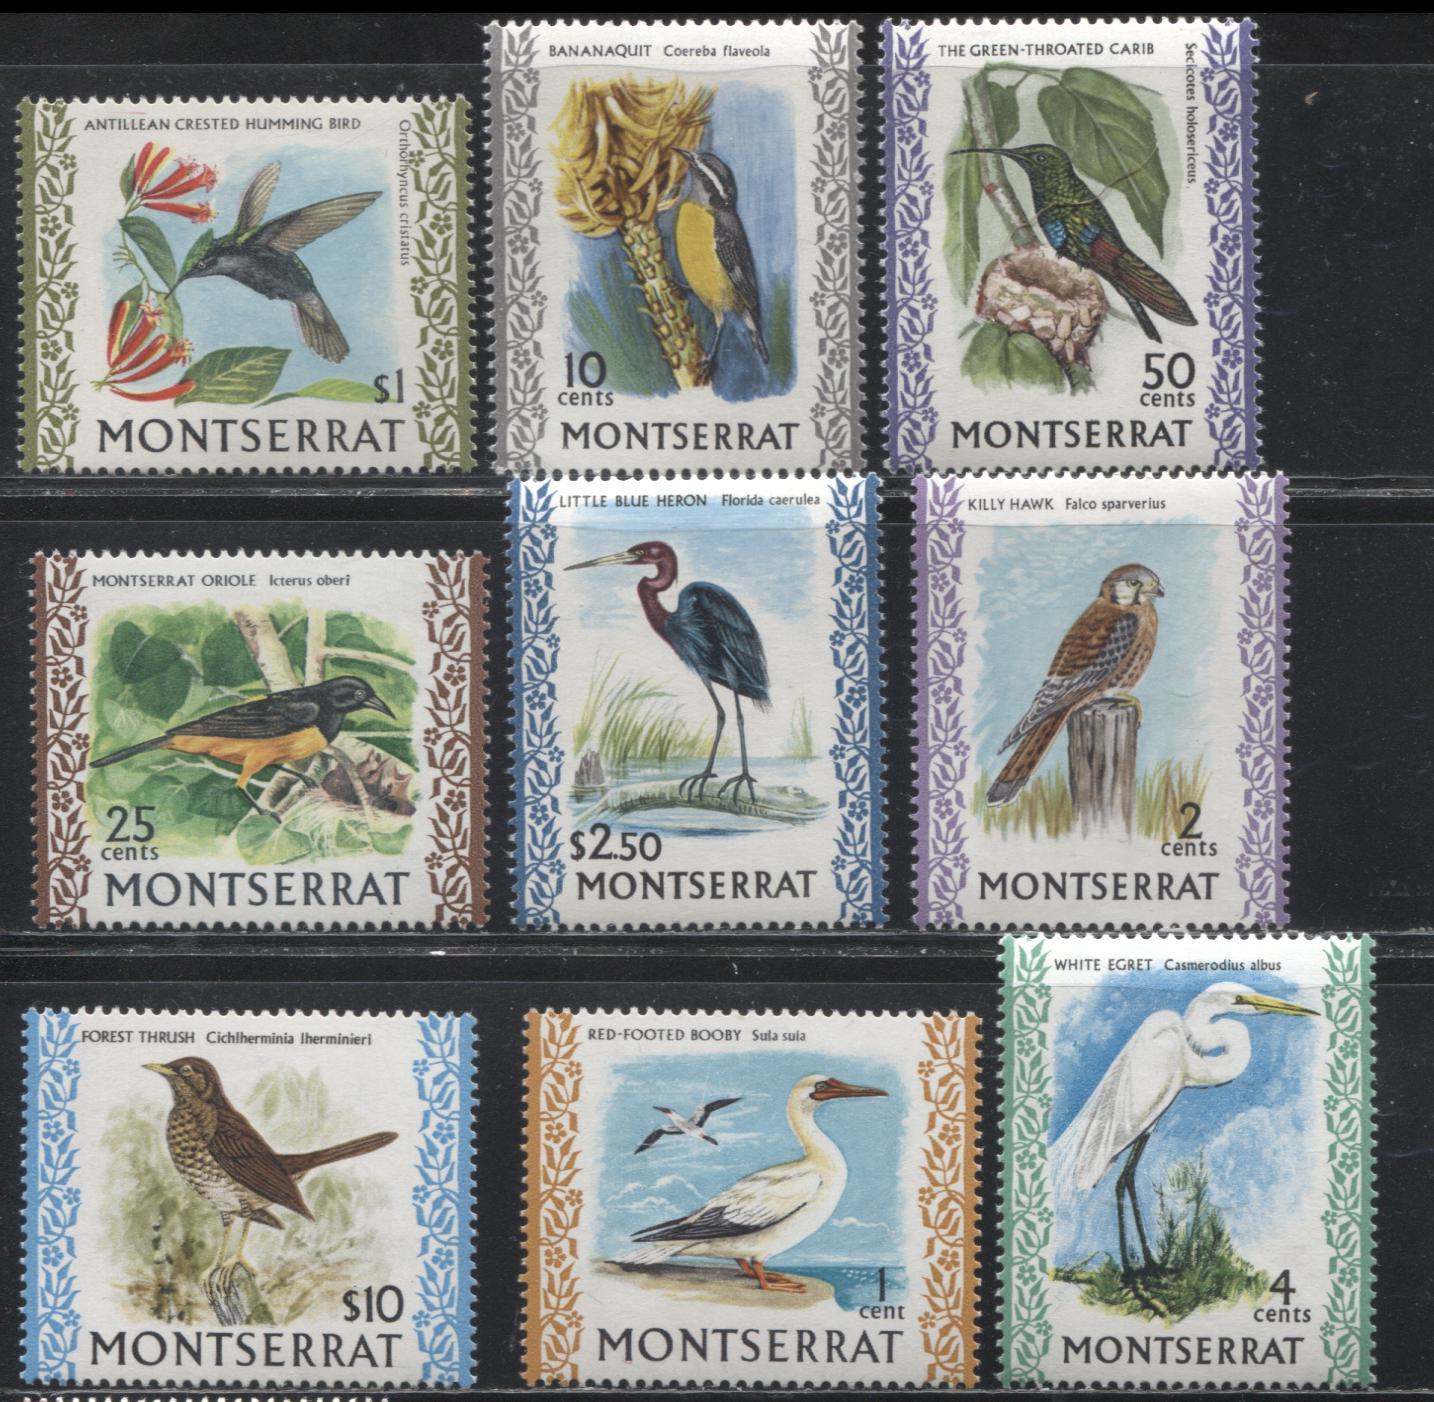 Lot 248 Montserrat SG #242/254c 1970-1974 Bird Definitive Issue A VFNH Complete Set of the Upright/Sideways Watermark, With Inverted Watermark on 25c and Double Inscription on 15c